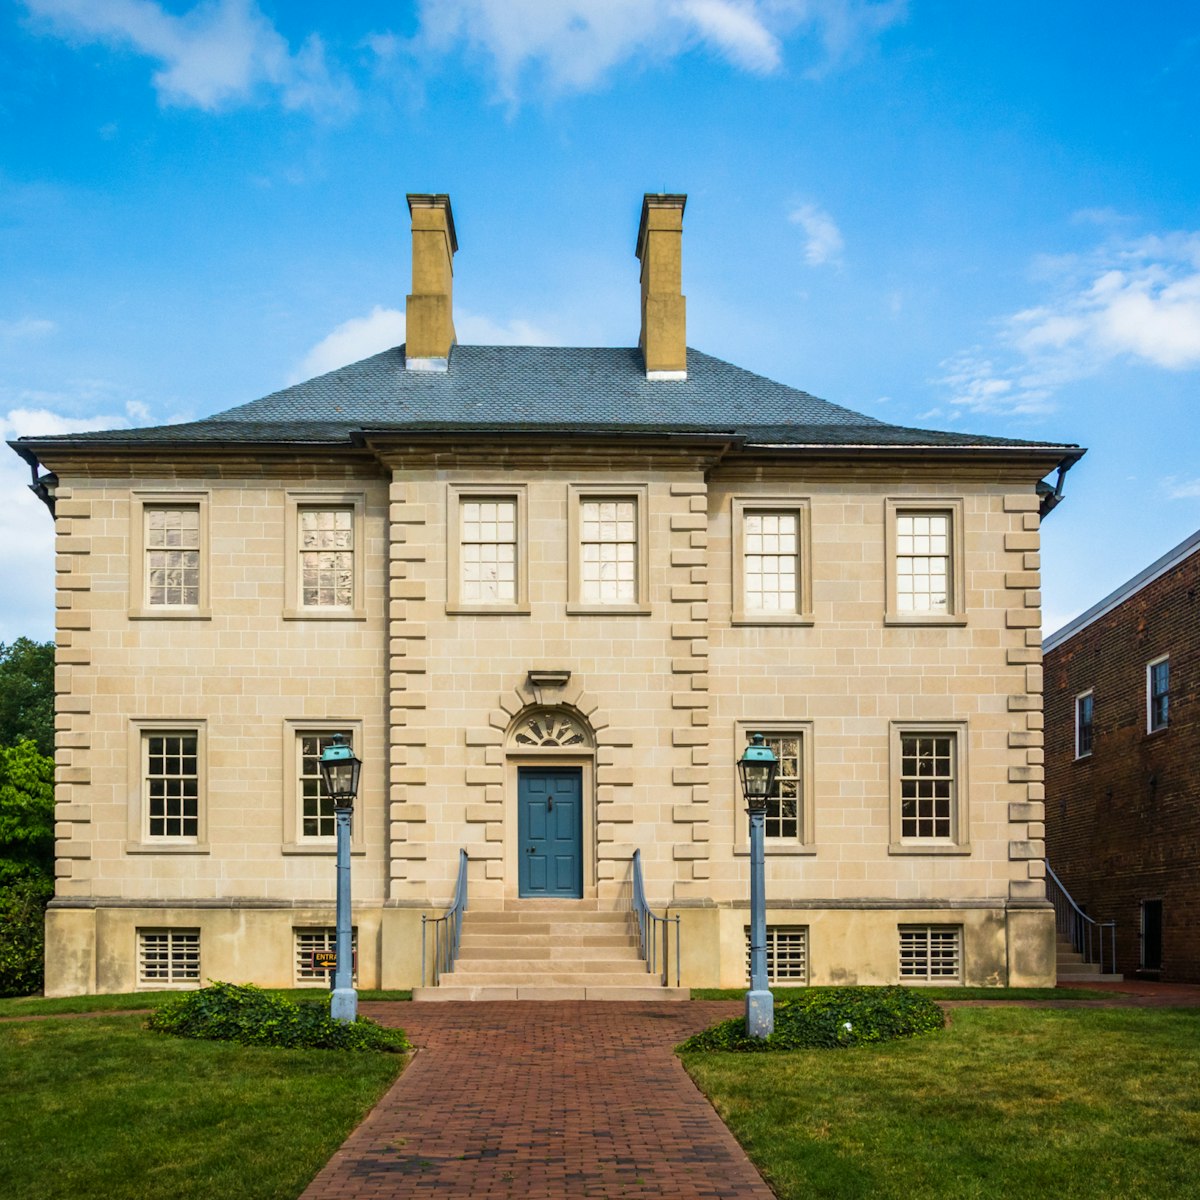 The historic Carlyle House, in Alexandria, Virginia.; Shutterstock ID 302612909; Your name (First / Last): redownload; GL account no.: redownload; Netsuite department name: redownload; Full Product or Project name including edition: redownload